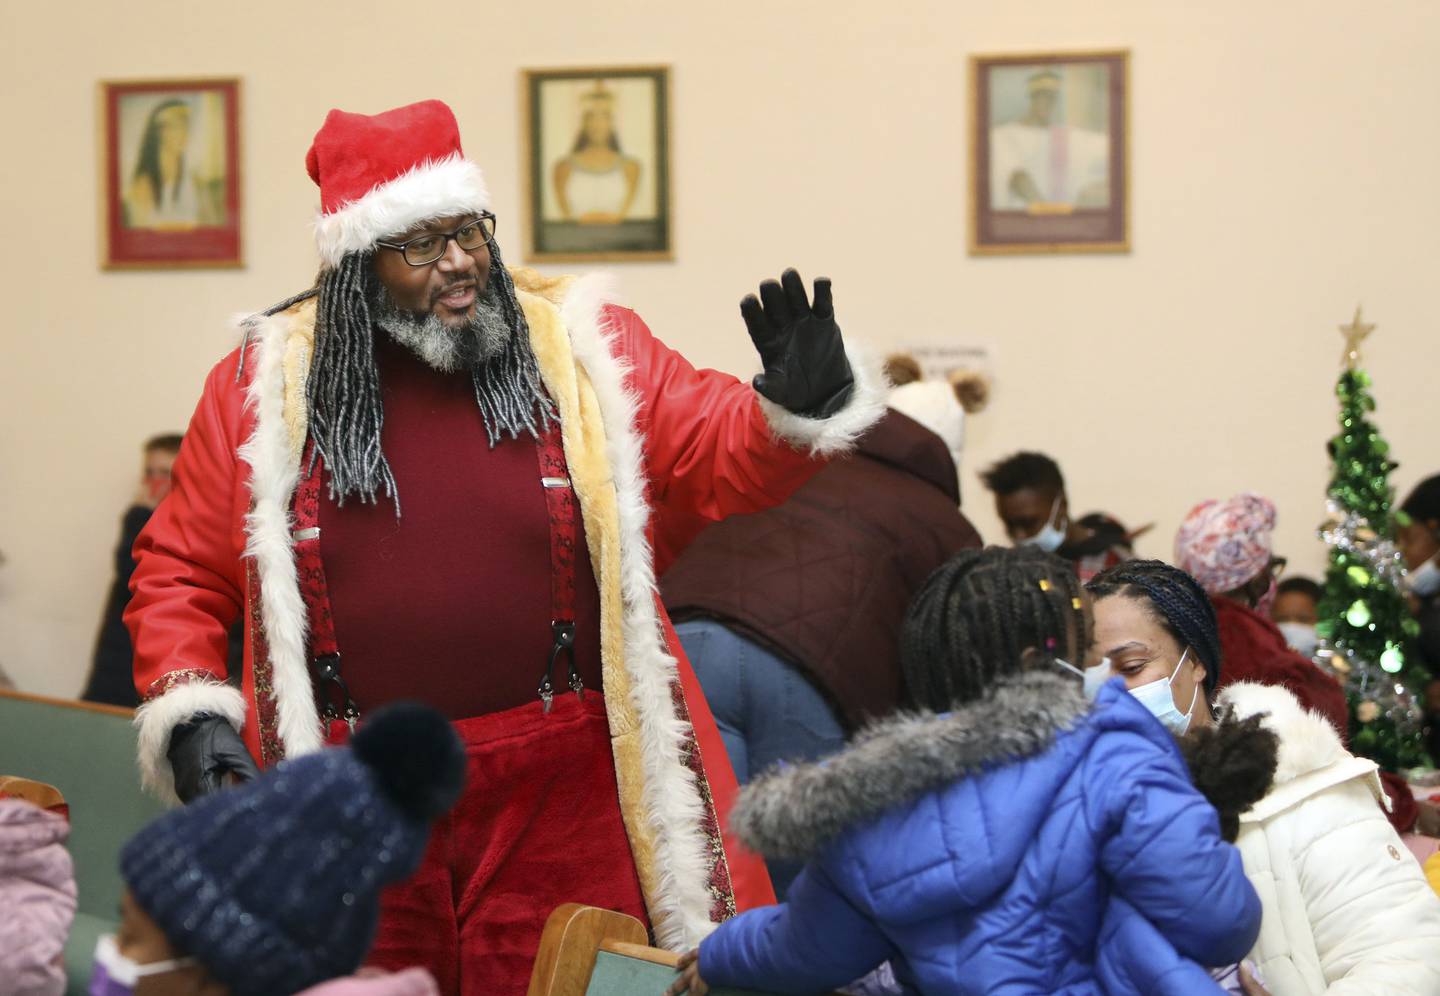 Dreezy Claus, portrayed by Andre Russell, visits families at Rose of Light Church in Chicago on Dec. 17, 2022.  